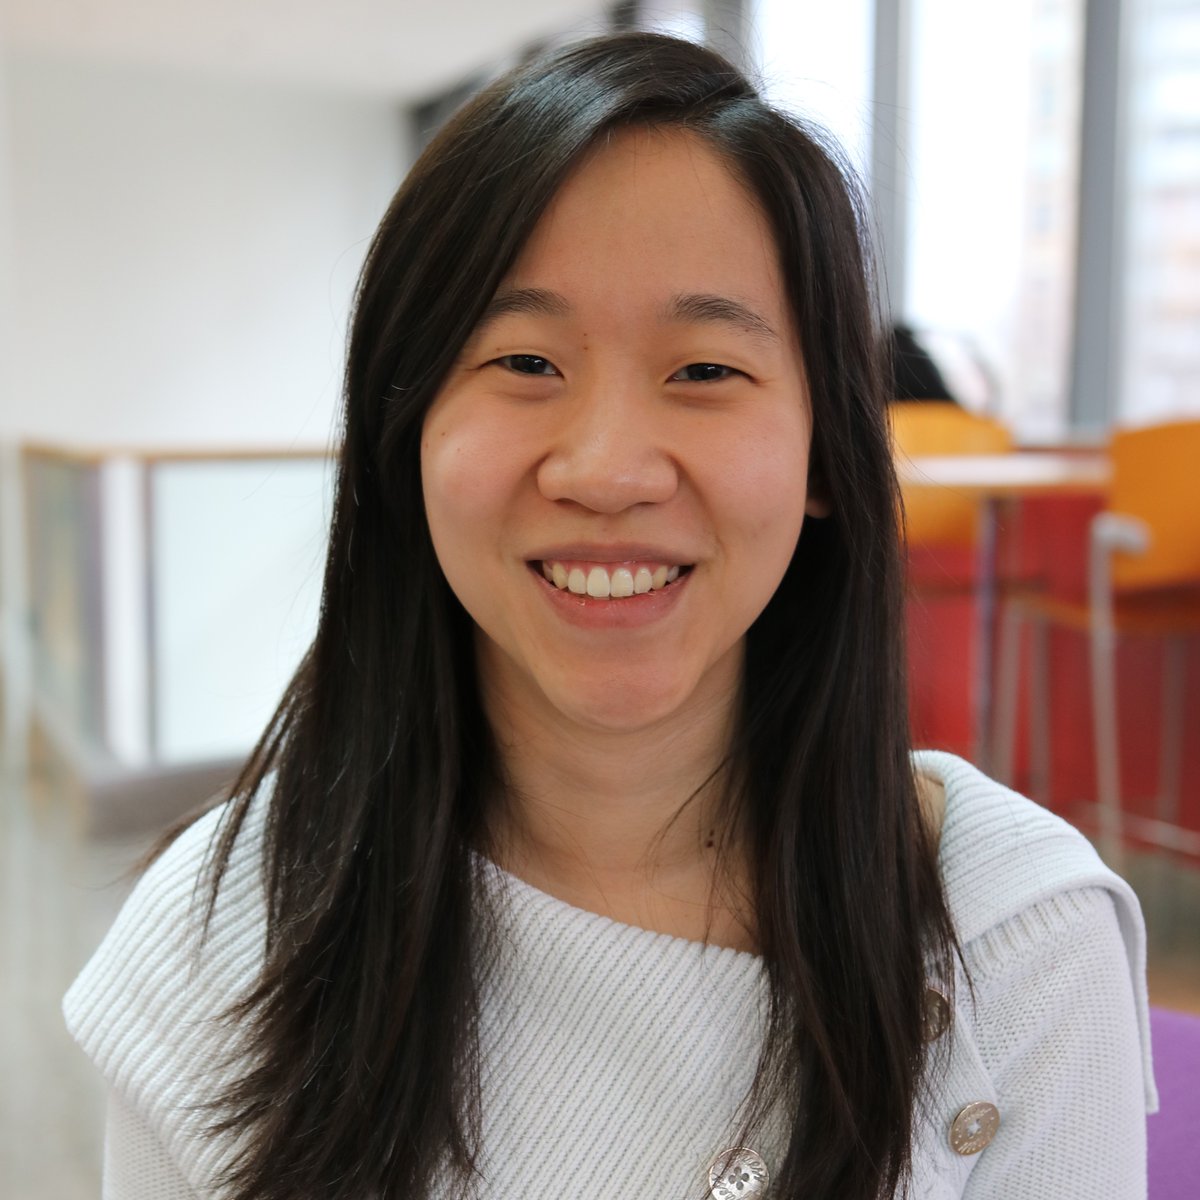 Please join us in congratulating @CAUSALab researcher @joy_shi1 who was promoted to Instructor of Epidemiology at @HarvardChanSPH & @HarvardEpi! Congratulations, Joy! We are lucky to have you part of the @CAUSALab team.